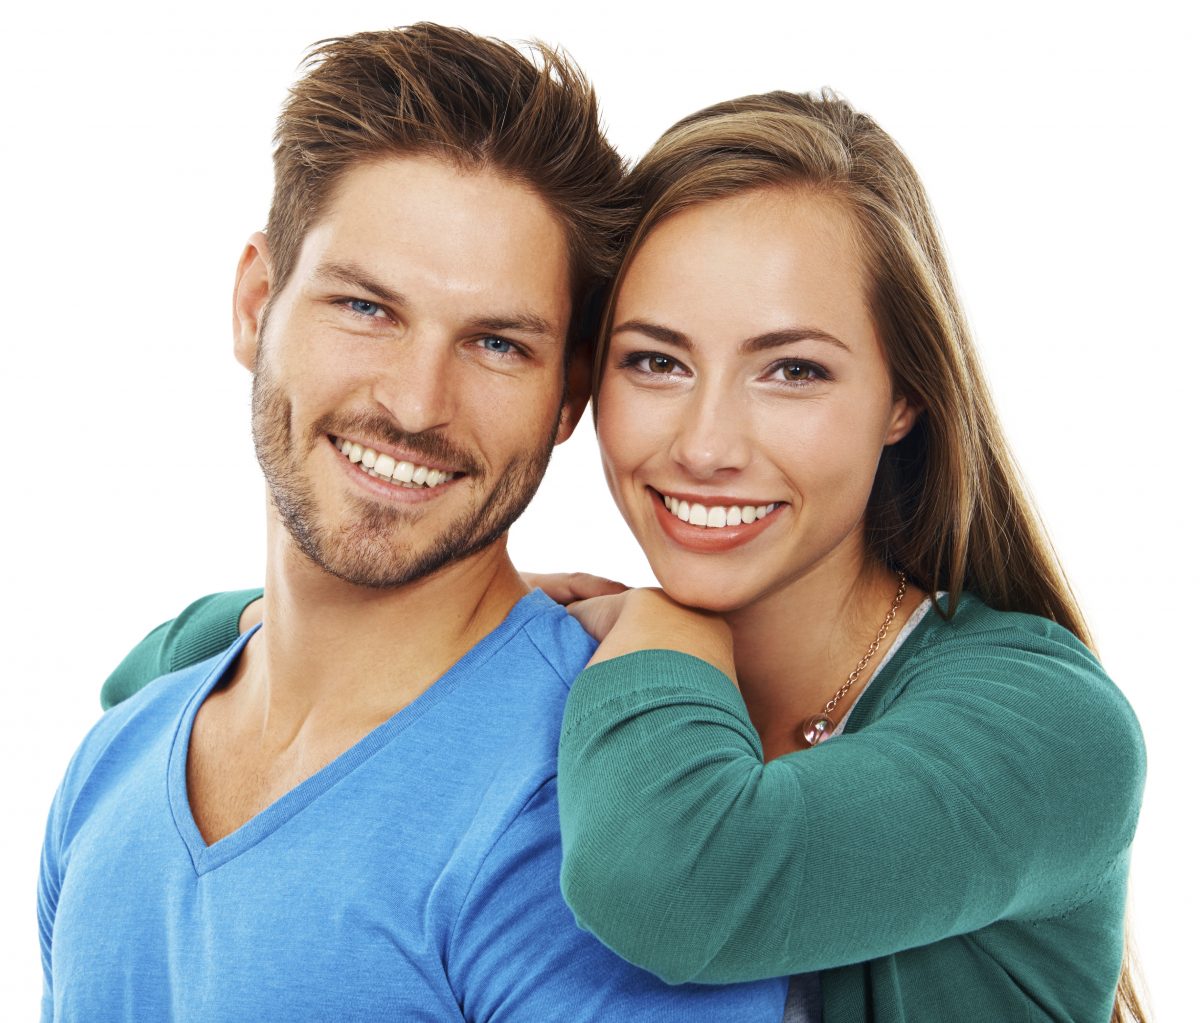 What to Expect with a Dental Exam & Professional Teeth Cleaning in Litchfield MN